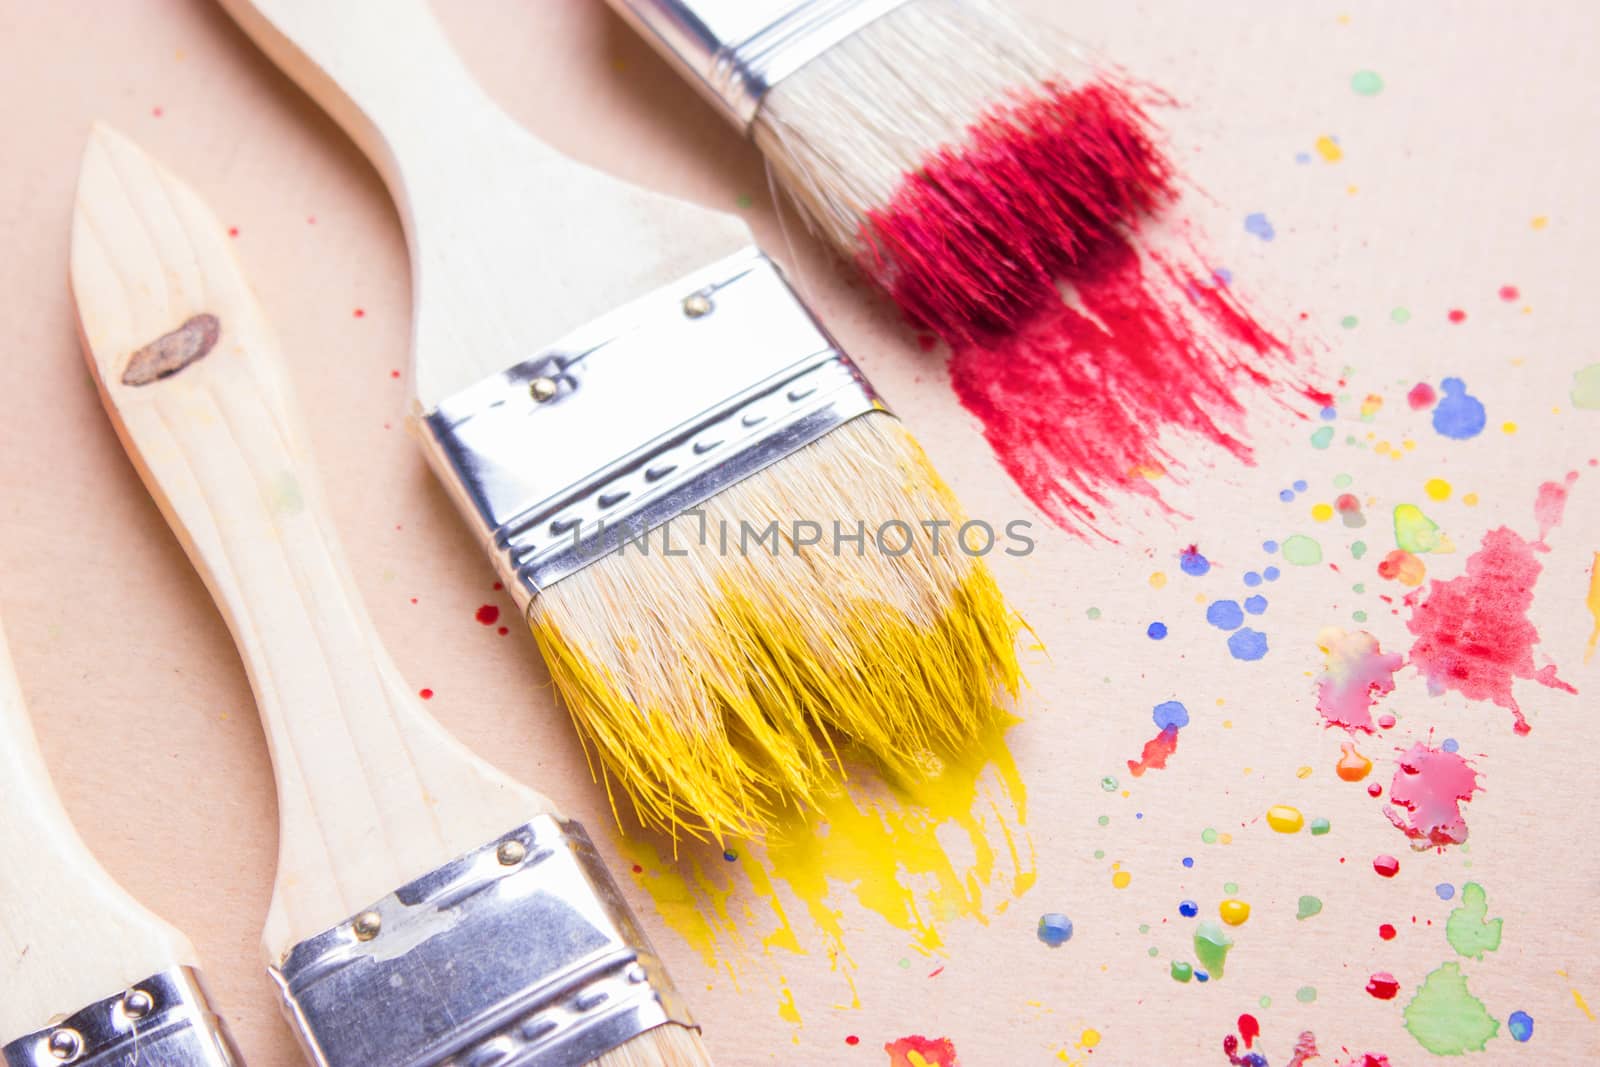 Different sizes paintbrushes against a background of multicolored paint spread.